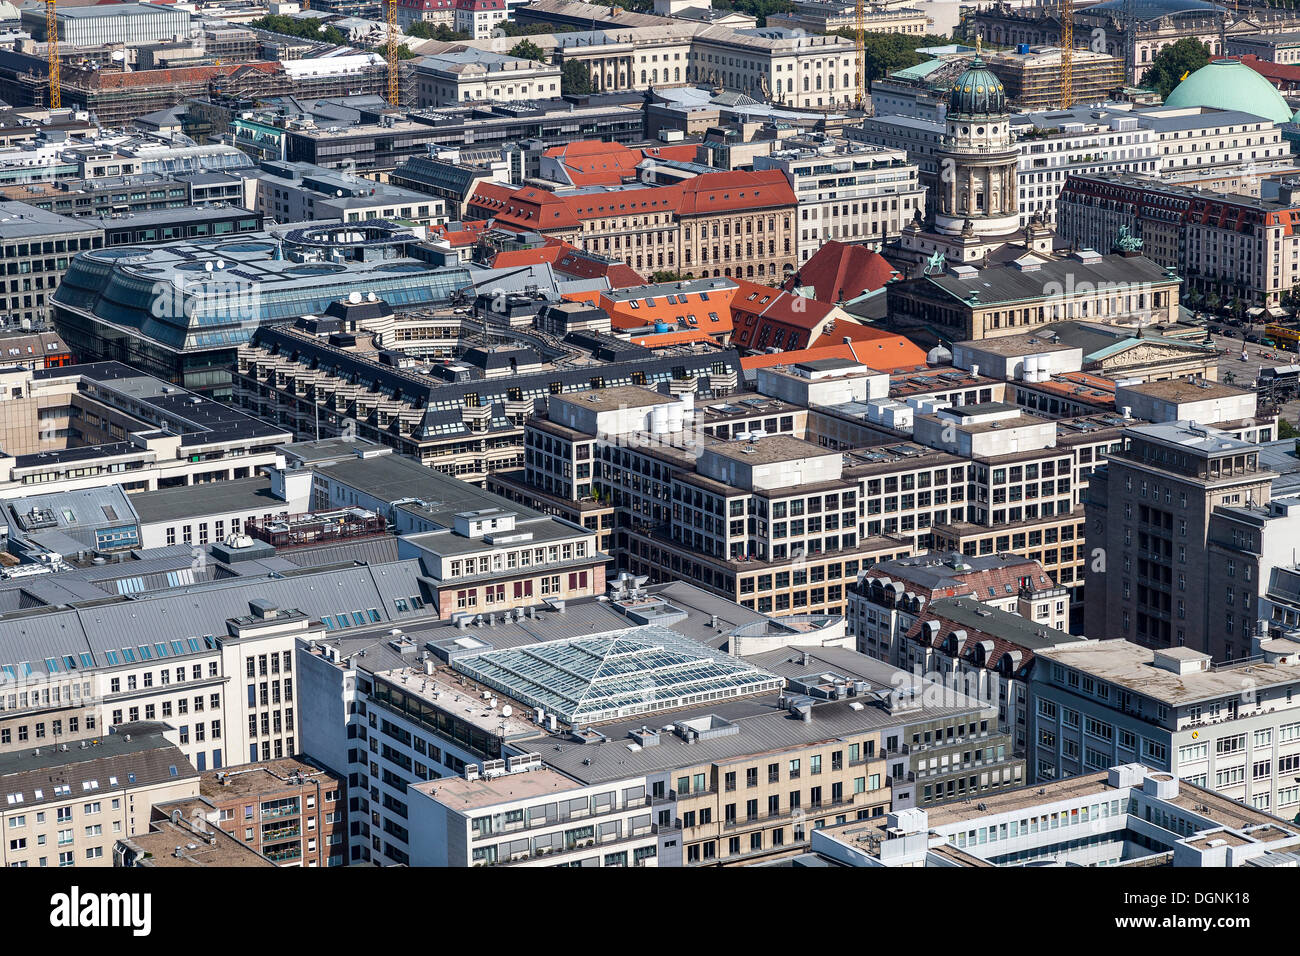 Top view of the centre of Berlin with the German and French Cathedrals on Gendarmenmarkt square, the Zeughaus, armoury building Stock Photo